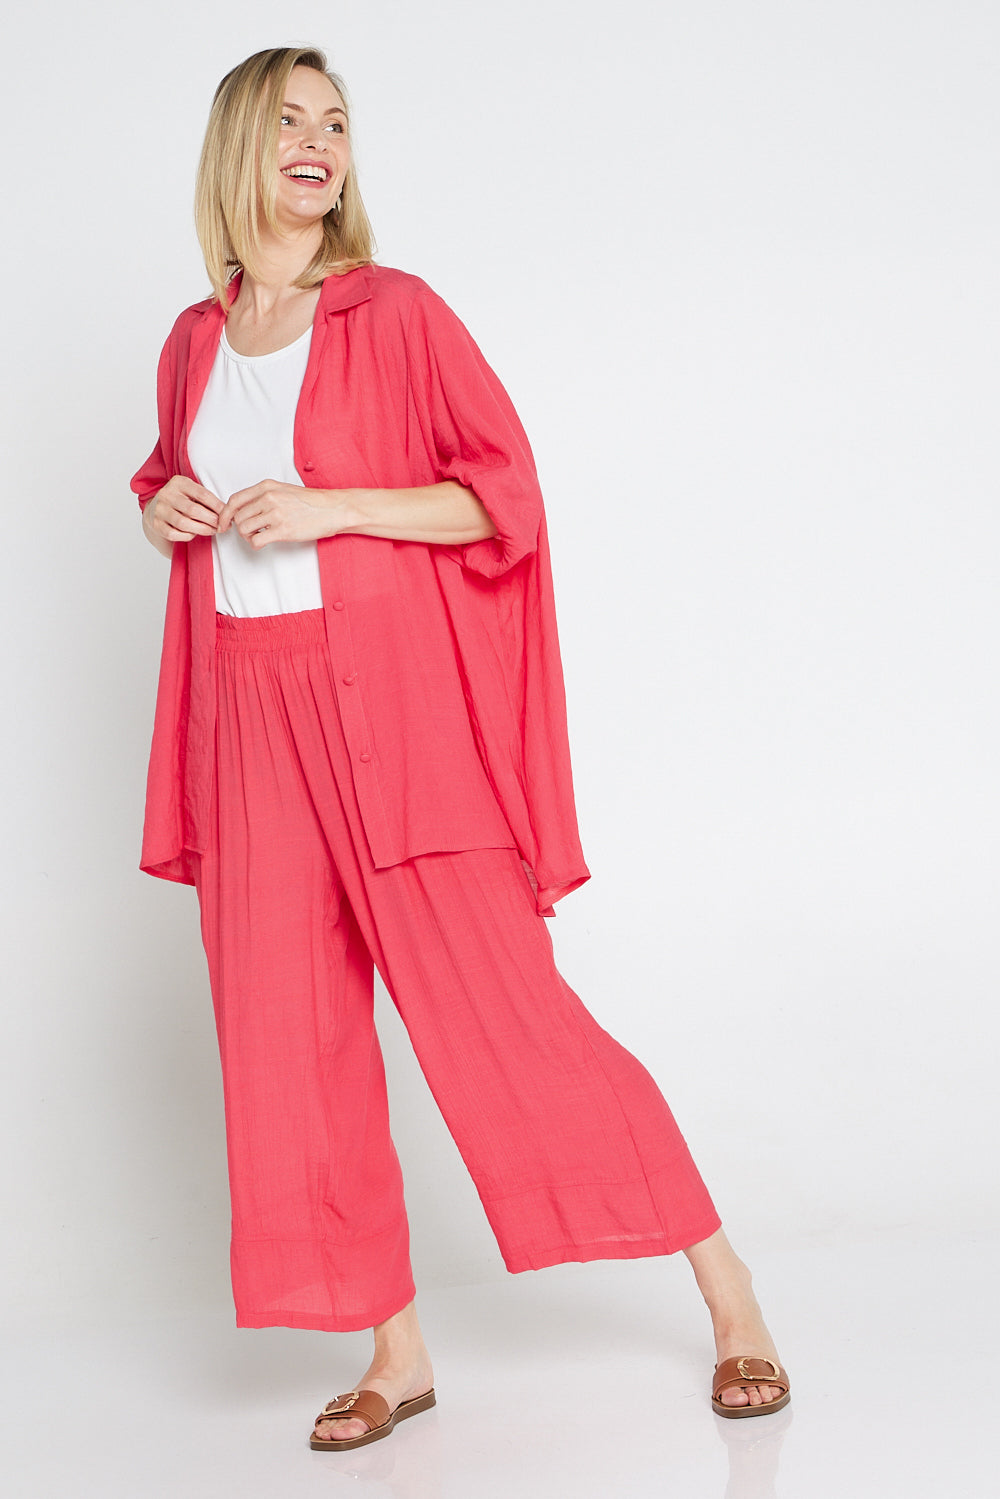 Cute in Comfort Wide Leg Pants in Pink - Allure Clothing Boutique